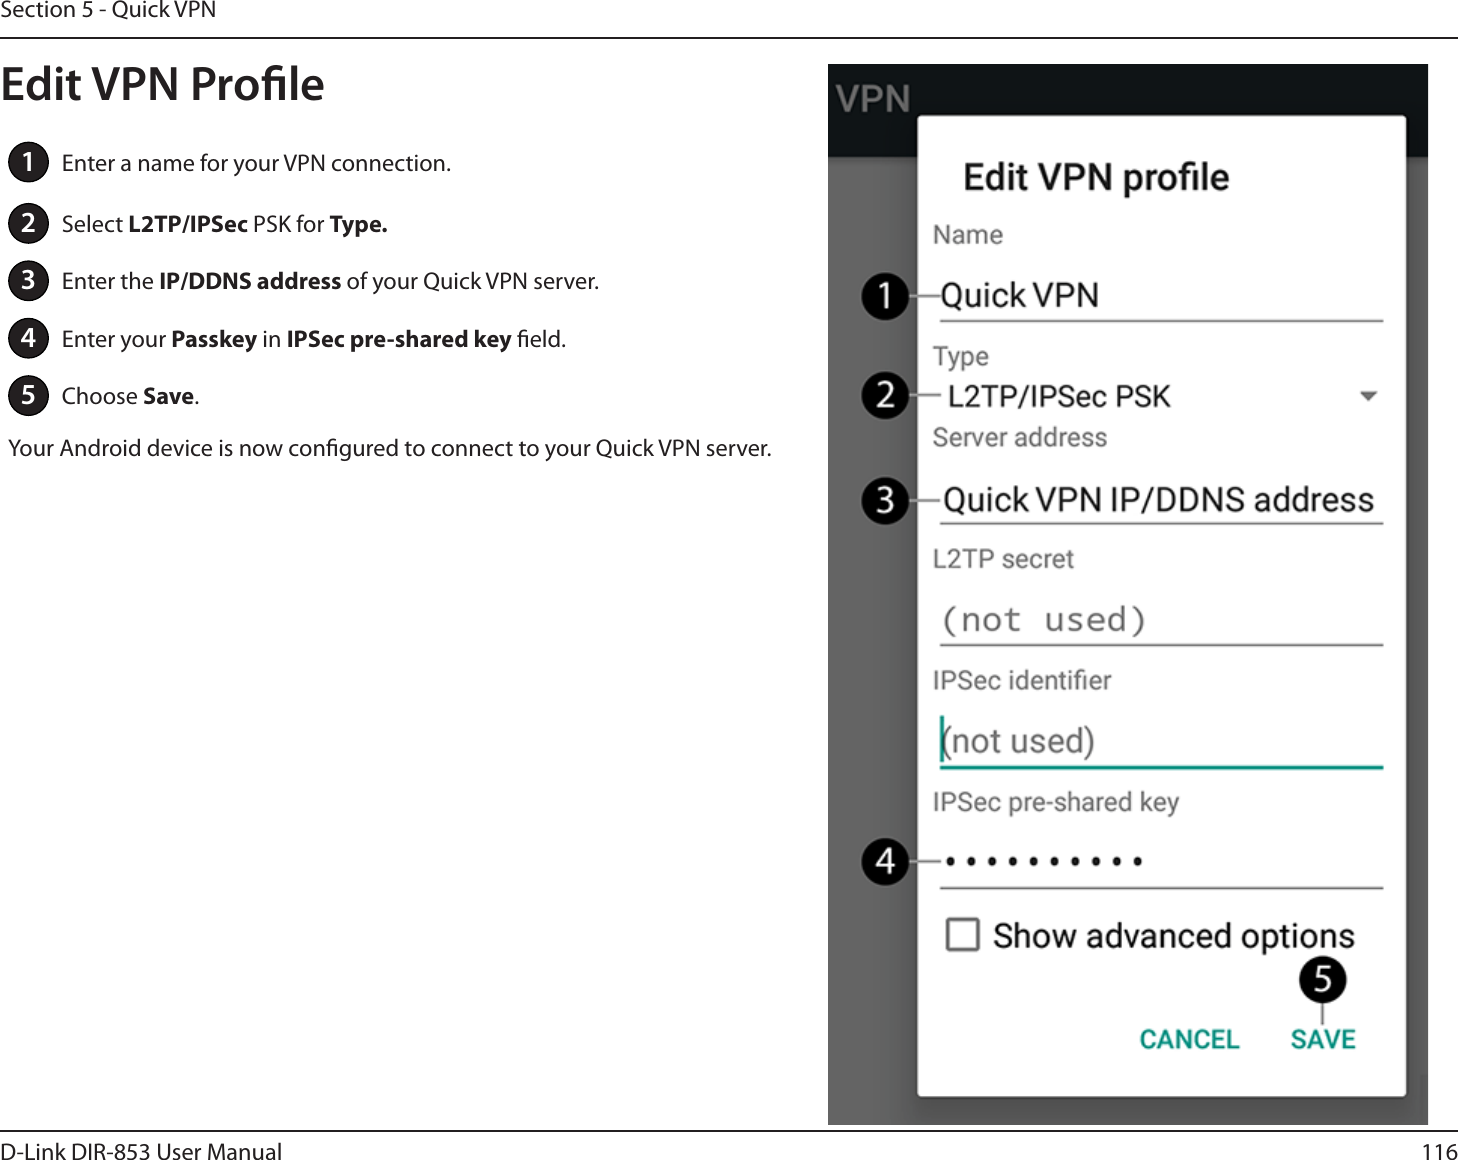 116D-Link DIR-853 User ManualSection 5 - Quick VPN1Enter a name for your VPN connection.2Select L2TP/IPSec PSK for Type.3Enter the IP/DDNS address of your Quick VPN server.4Enter your Passkey in IPSec pre-shared key eld.5Choose Save.Your Android device is now congured to connect to your Quick VPN server.Edit VPN Prole